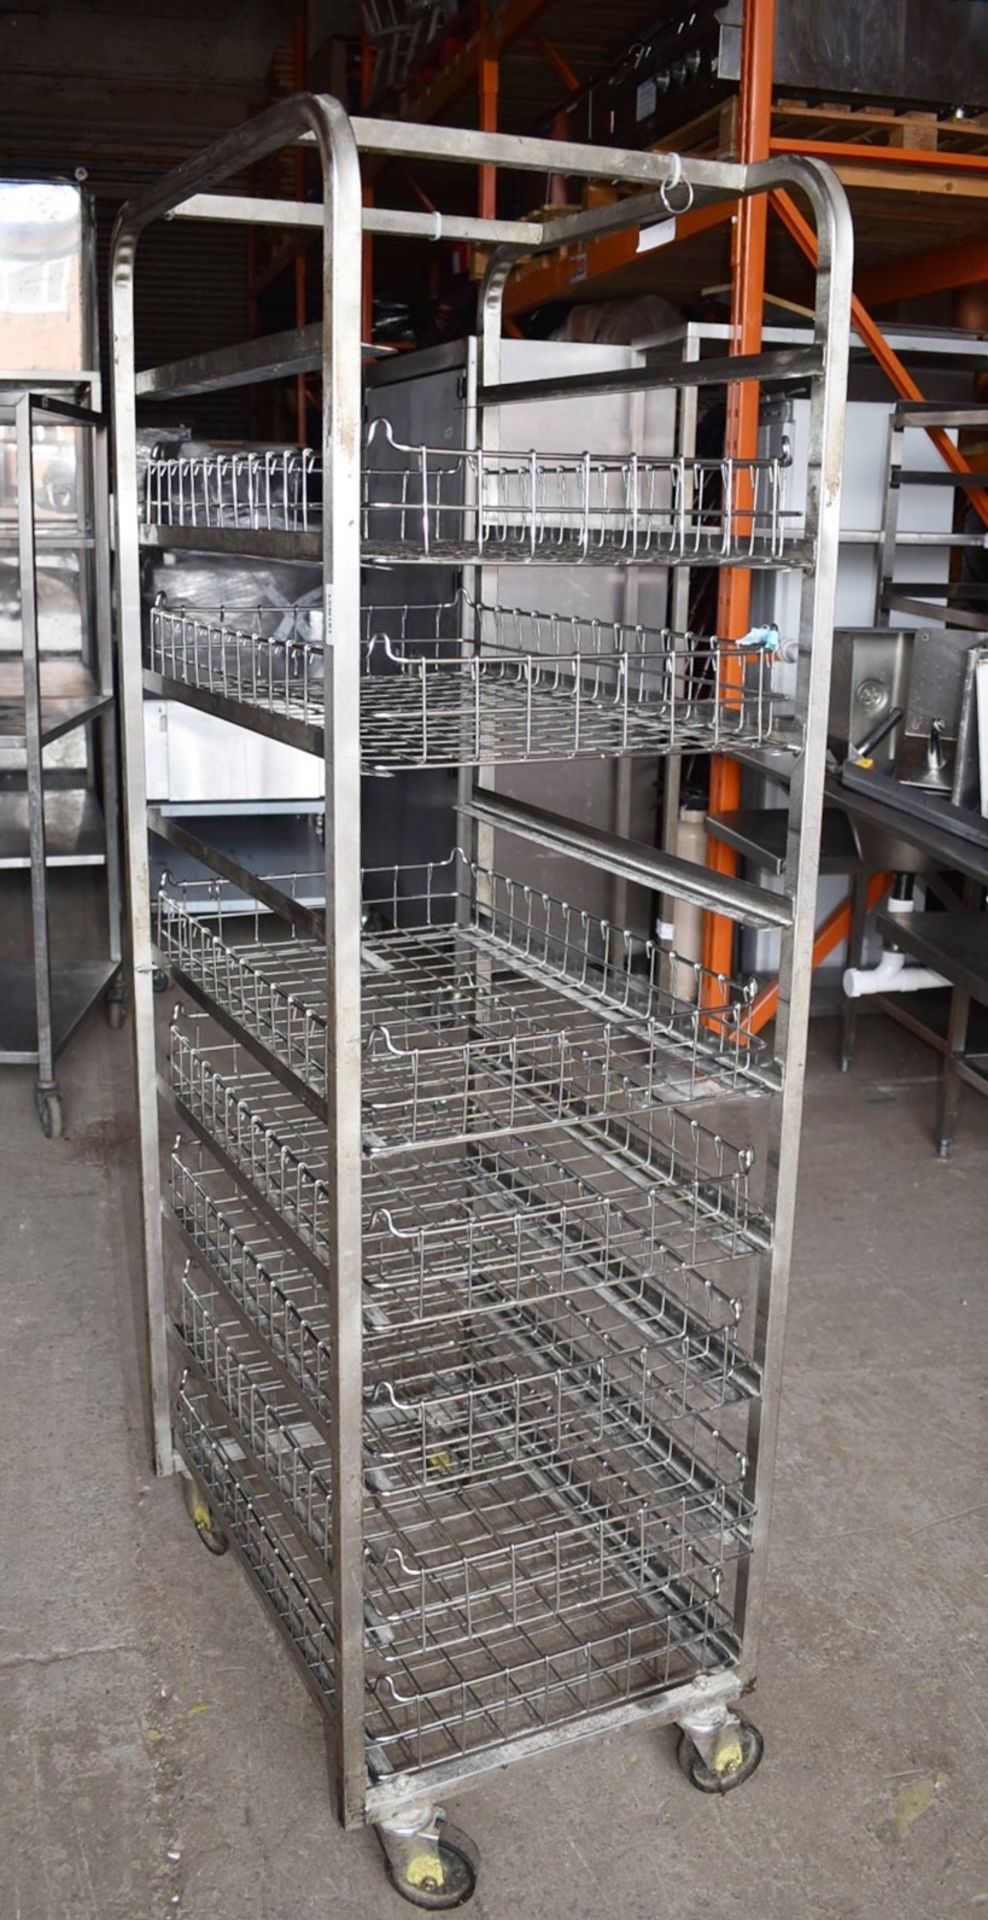 1 x Bakers 11 Tier Mobile Tray Rack With 7 Removable Wire Baskets - Stainless Steel With Castors - - Image 6 of 8